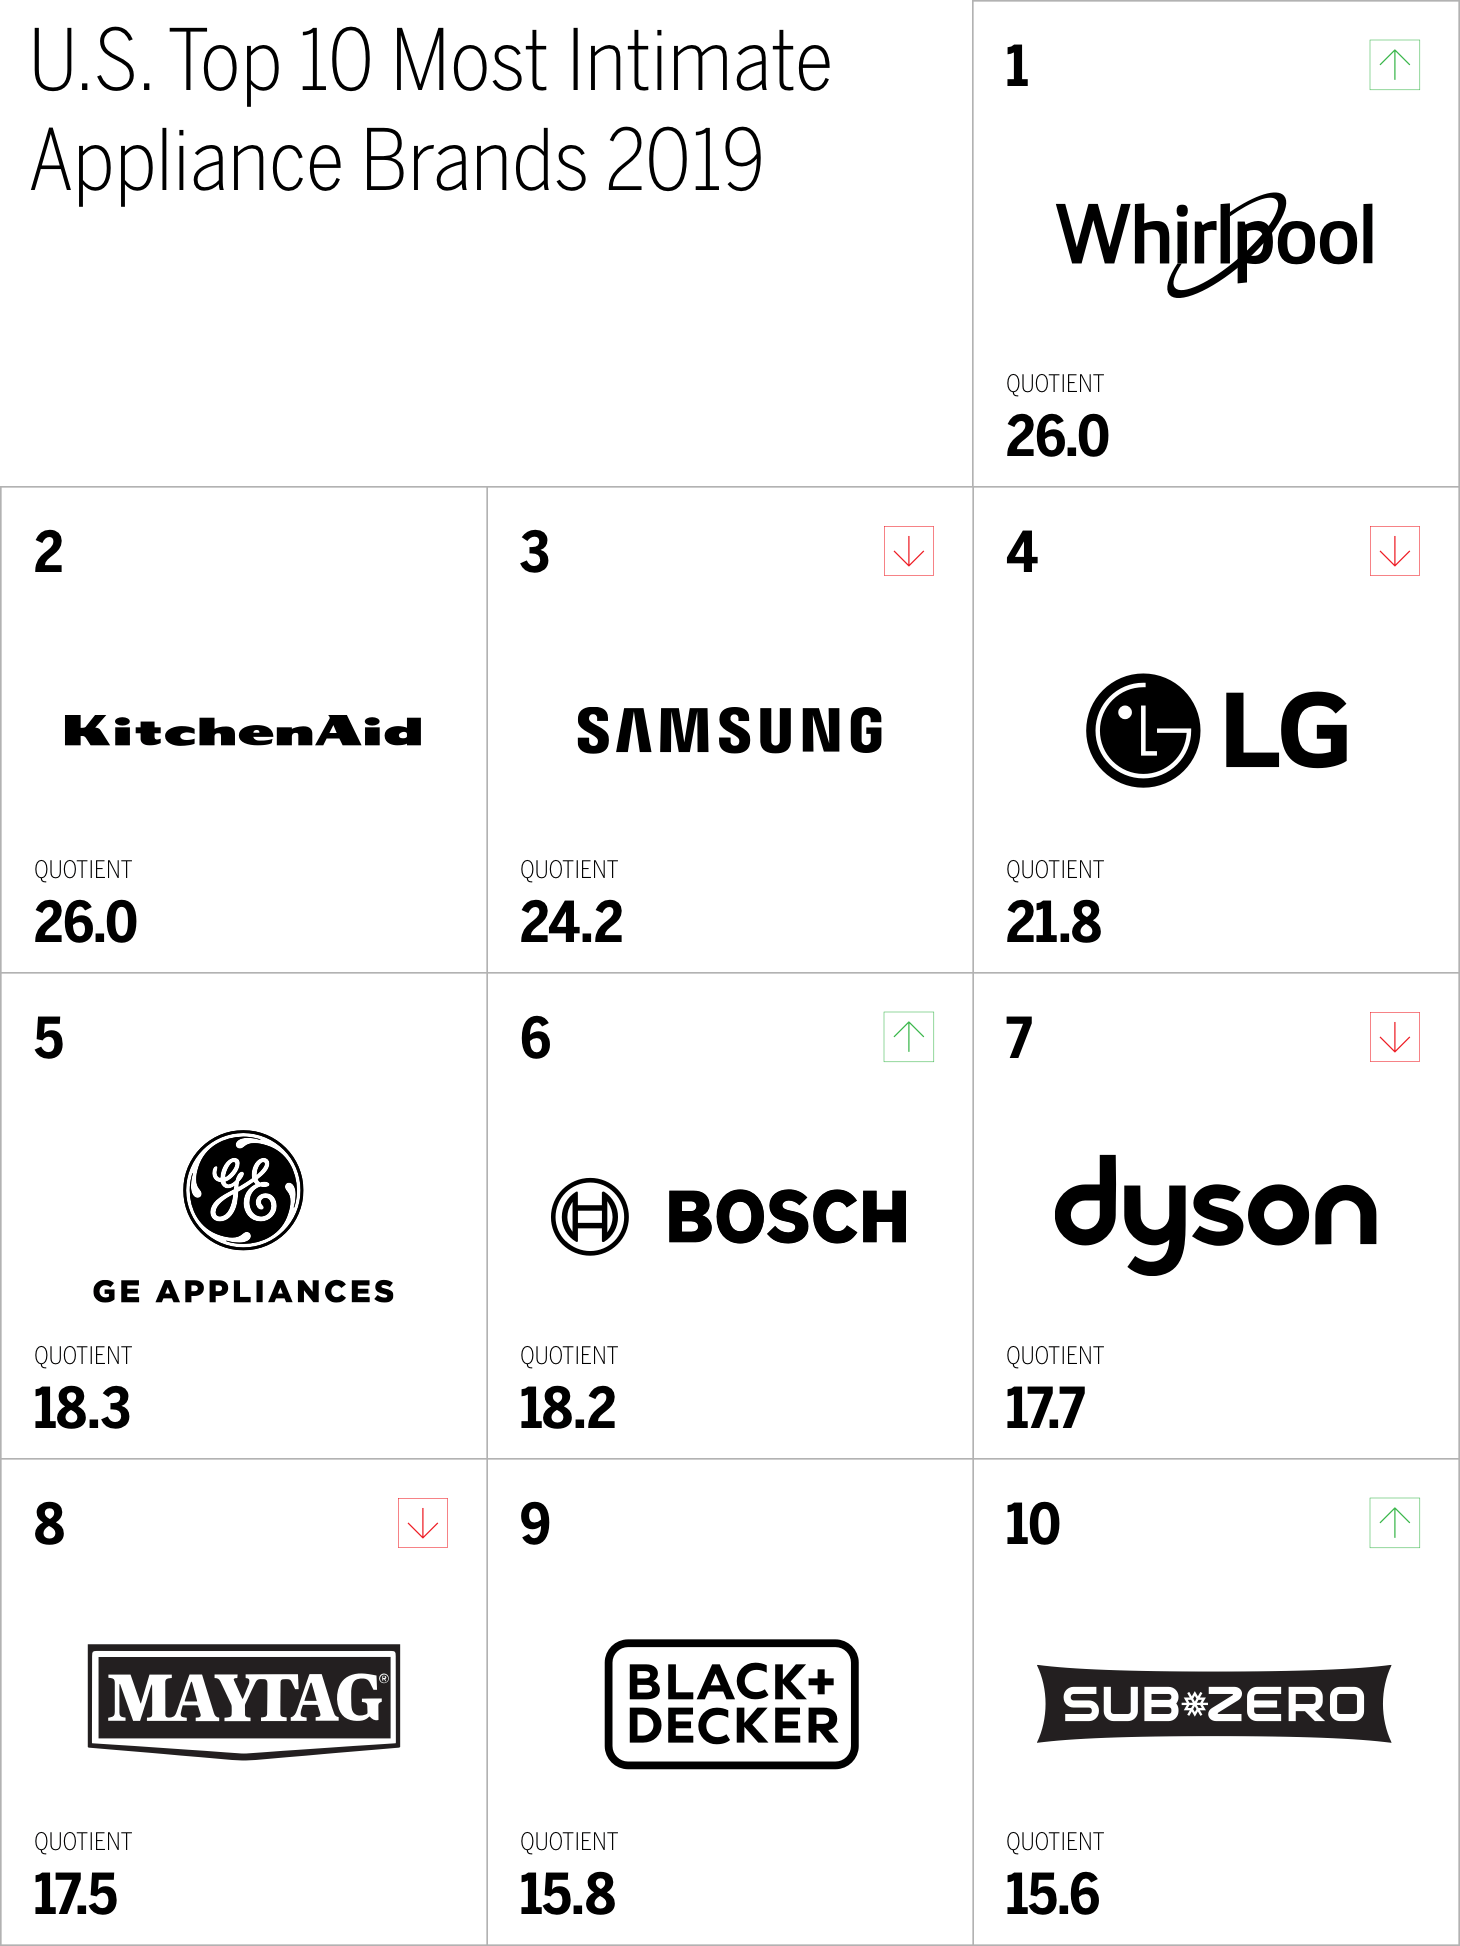 U.S. Top 10 Most Intimate
Appliance Brands 2019 Chart